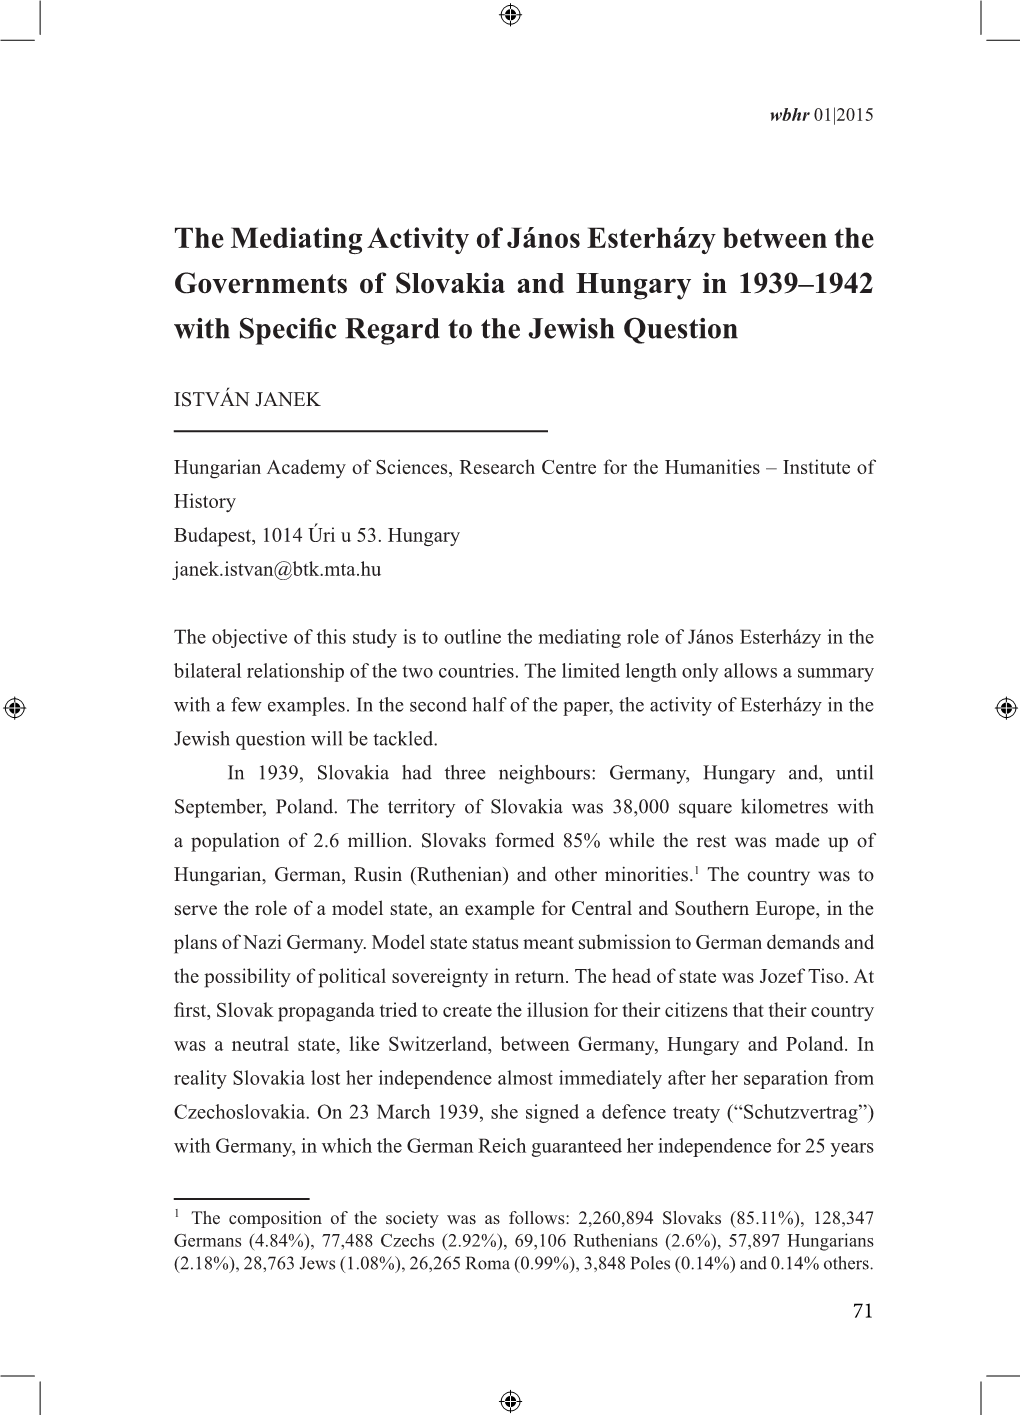 The Mediating Activity of János Esterházy Between the Governments of Slovakia and Hungary in 1939–1942 with Specific Regard to the Jewish Question